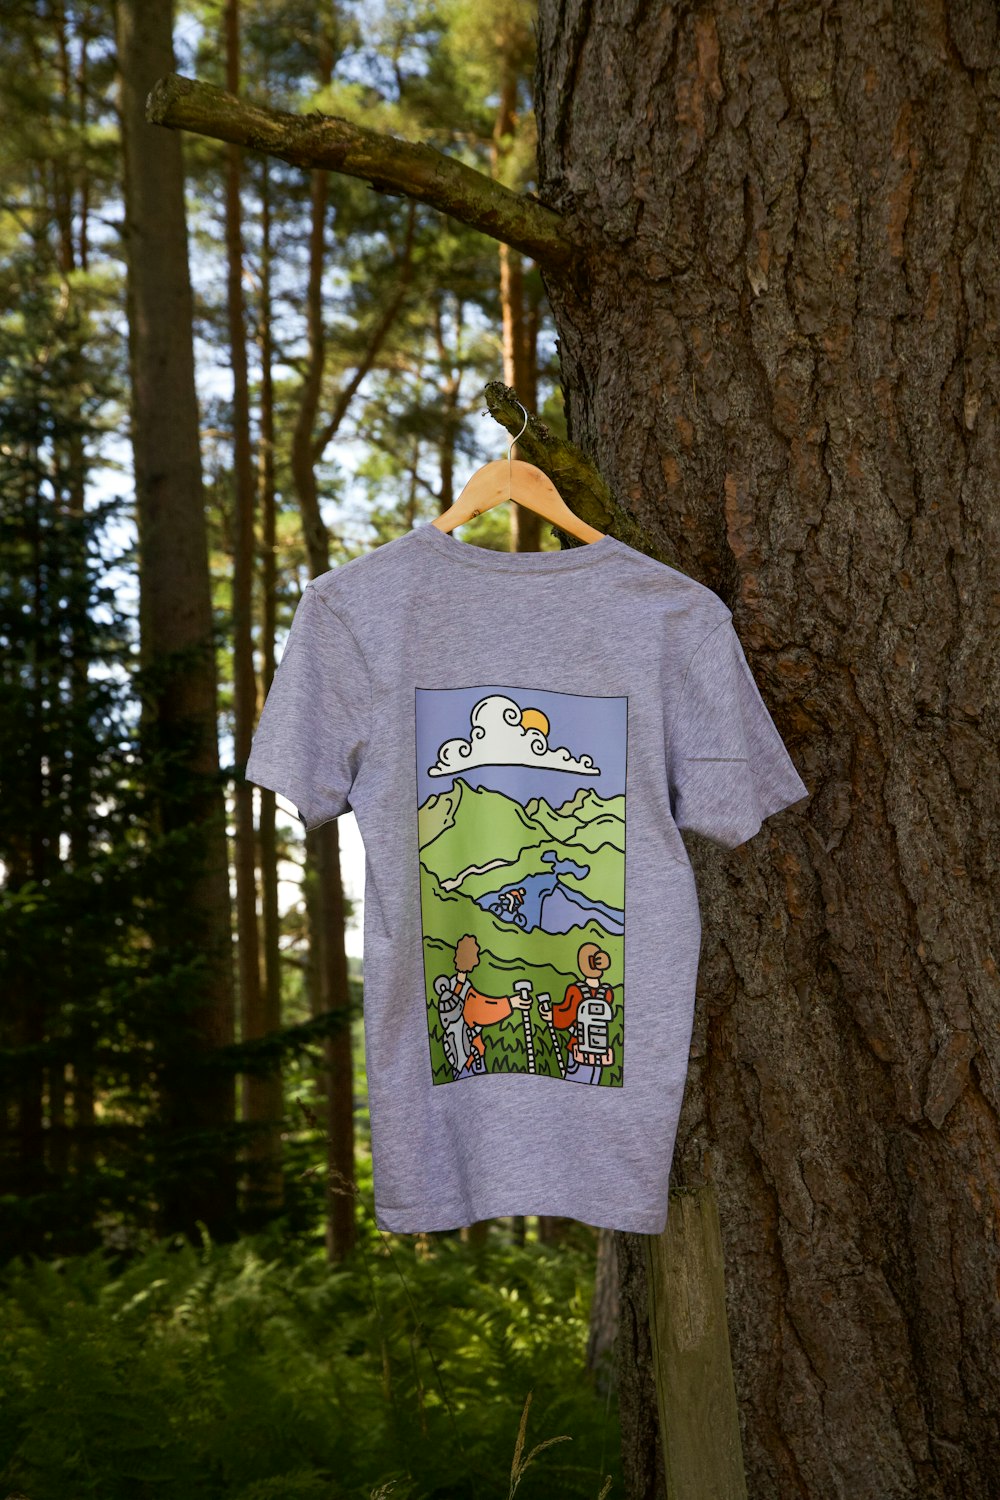 a t - shirt hanging on a tree in a forest